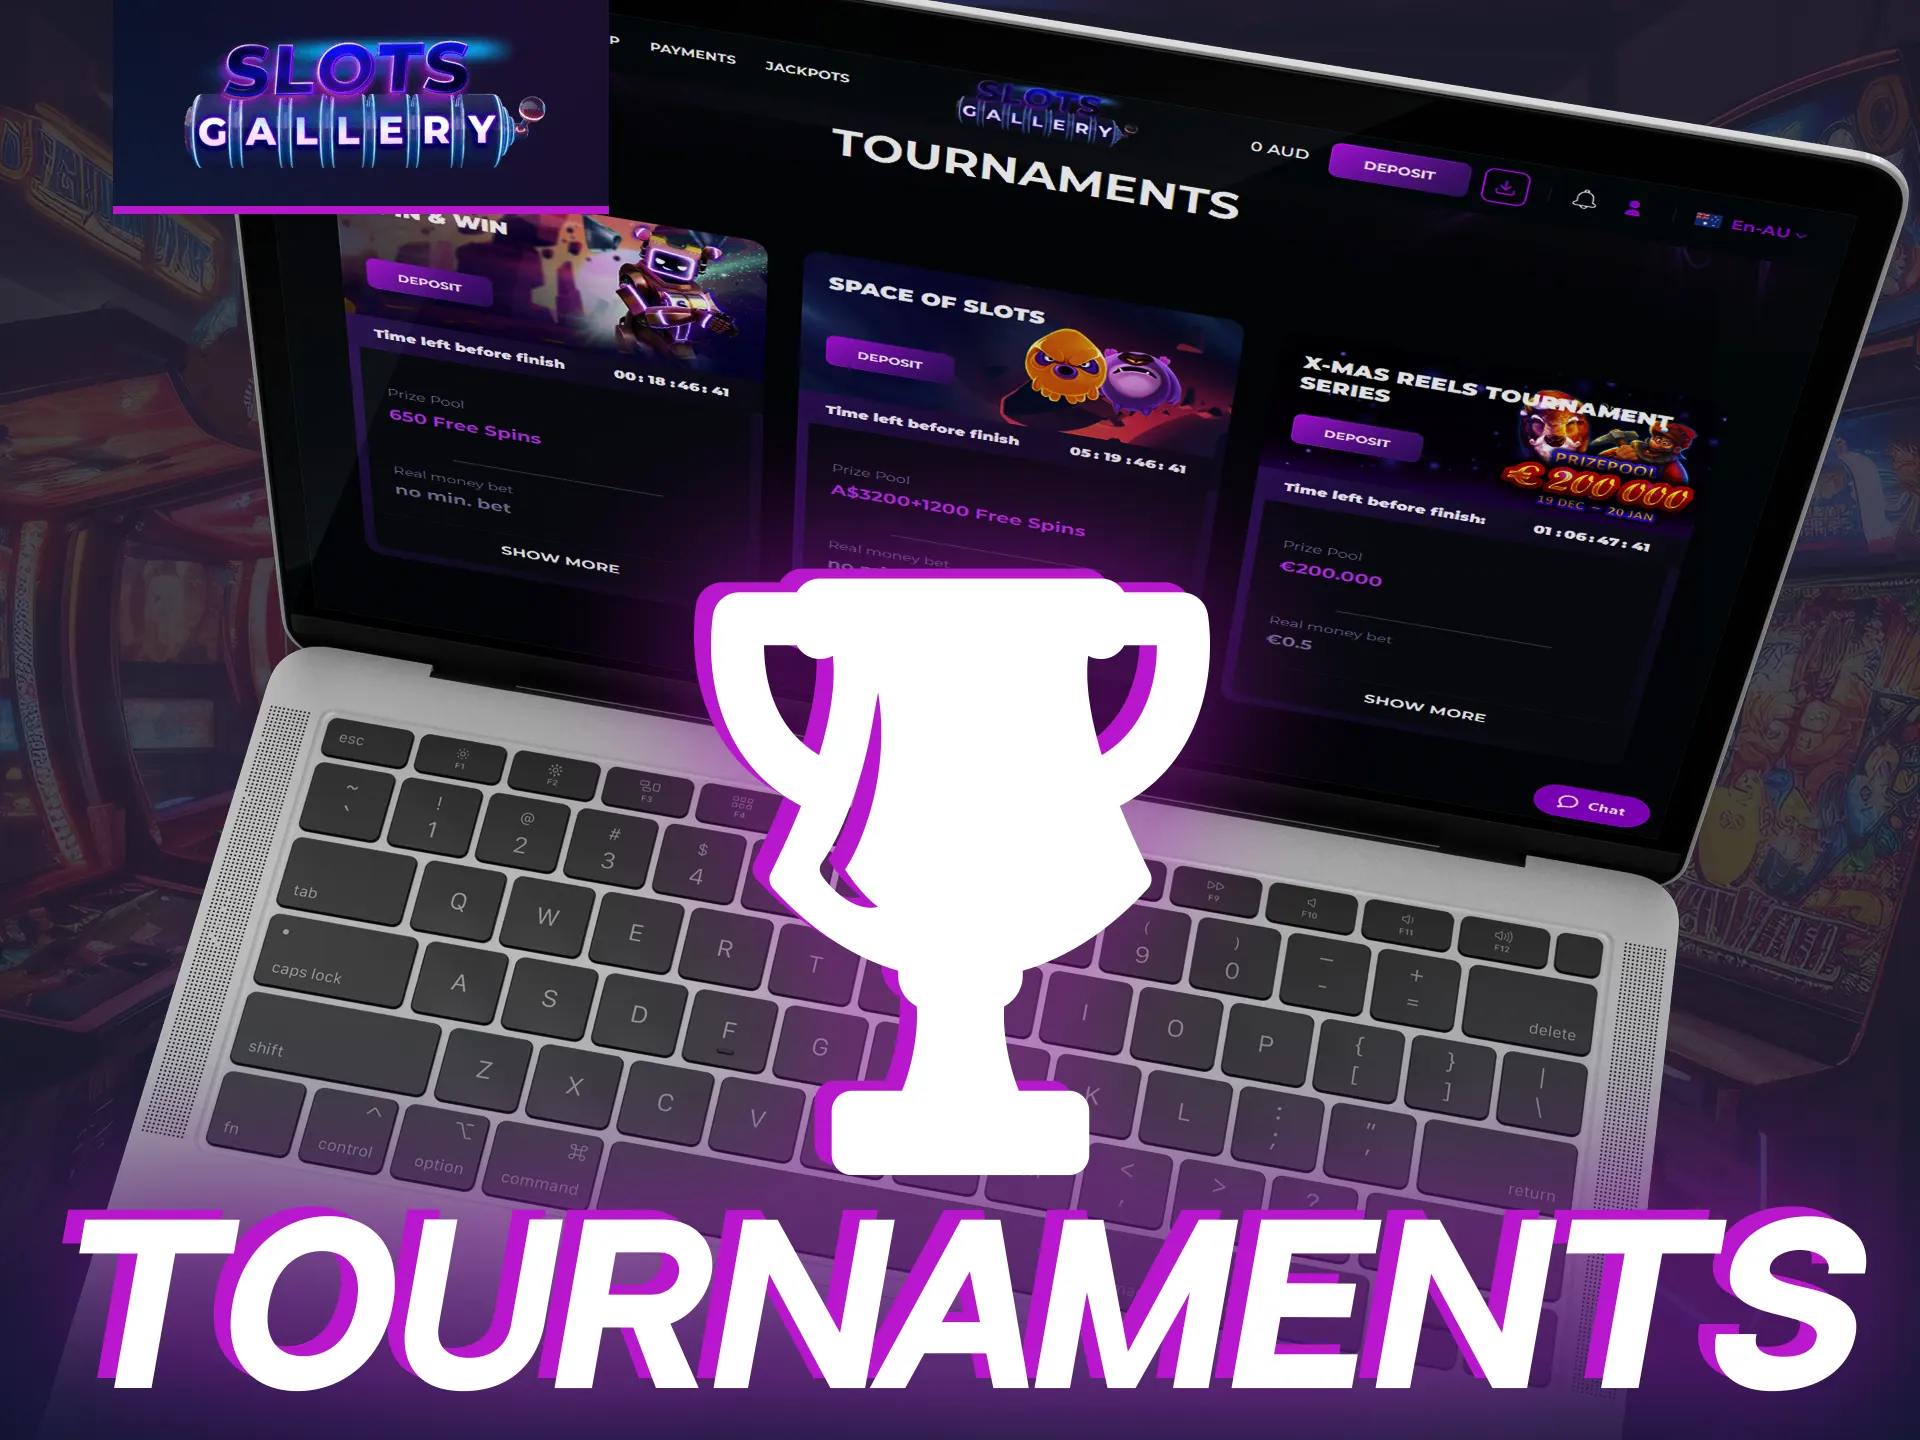 Join Slots Gallery tournaments for cash prizes and free spins.